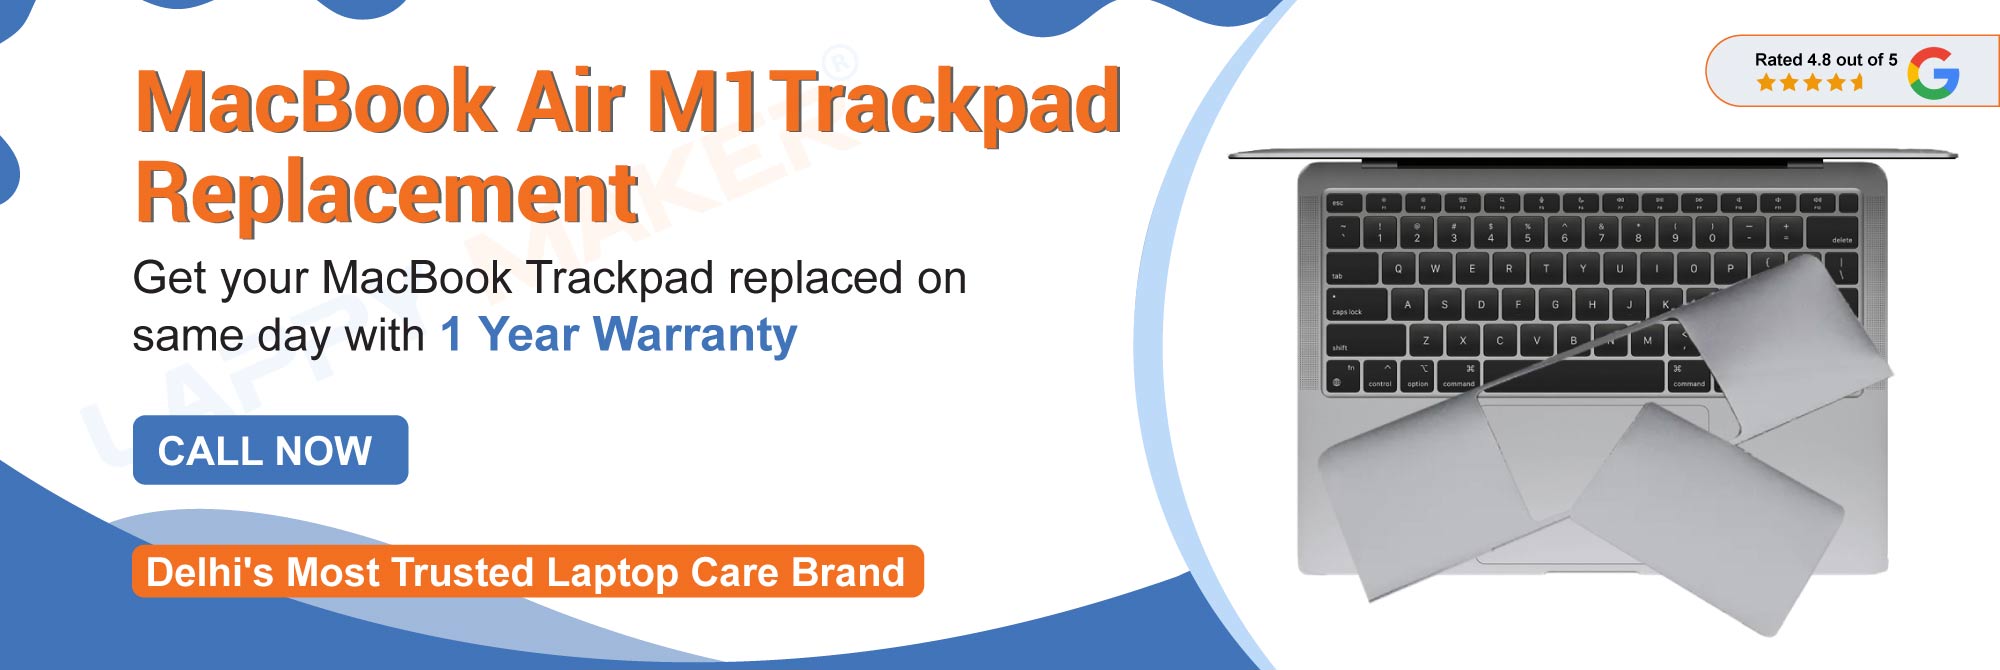 macbook air m1 a2337 trackpad replacement